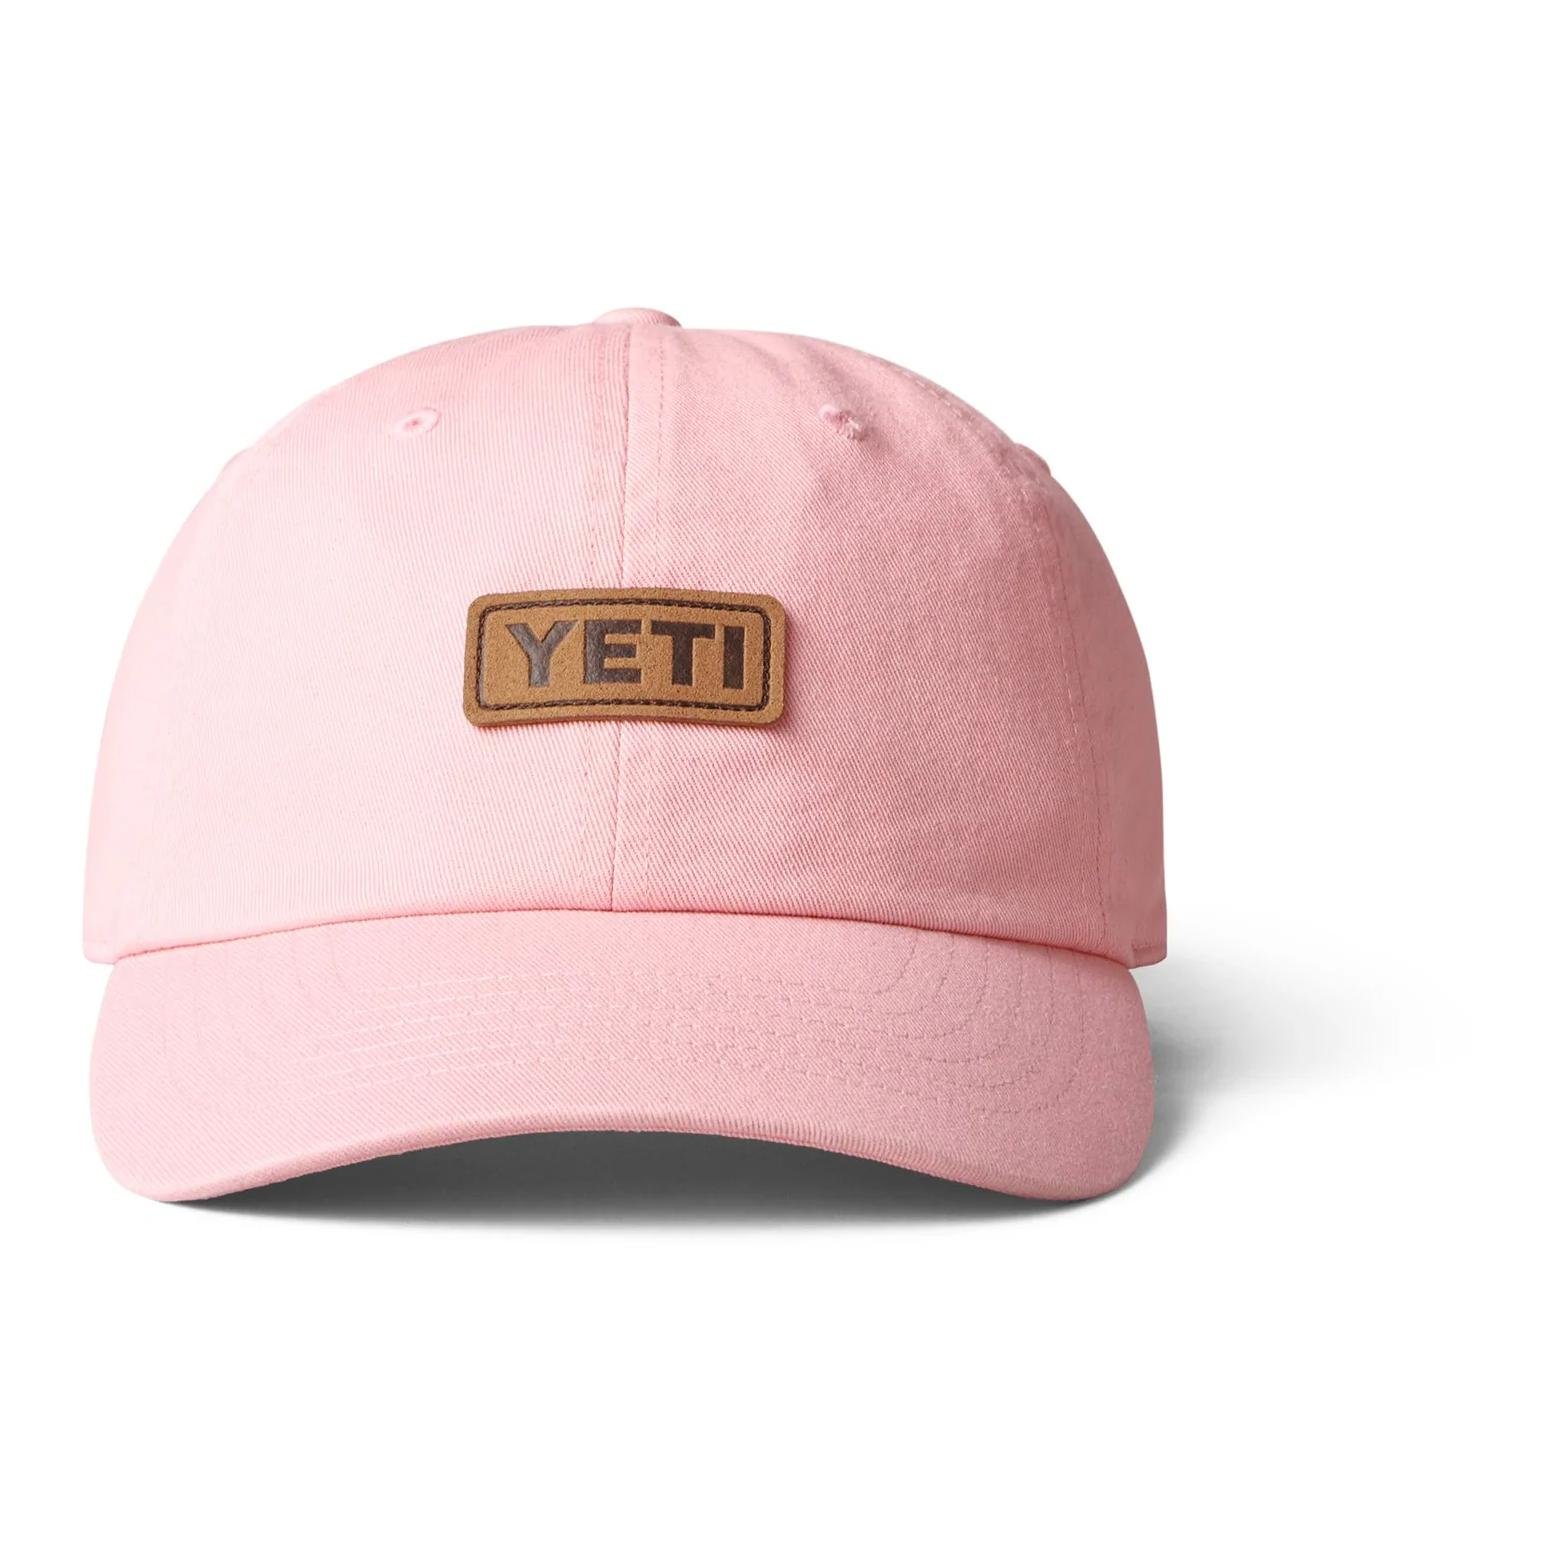 Image of YETI Leather LB Hat - Cap - Light Pink - bei fischen.ch